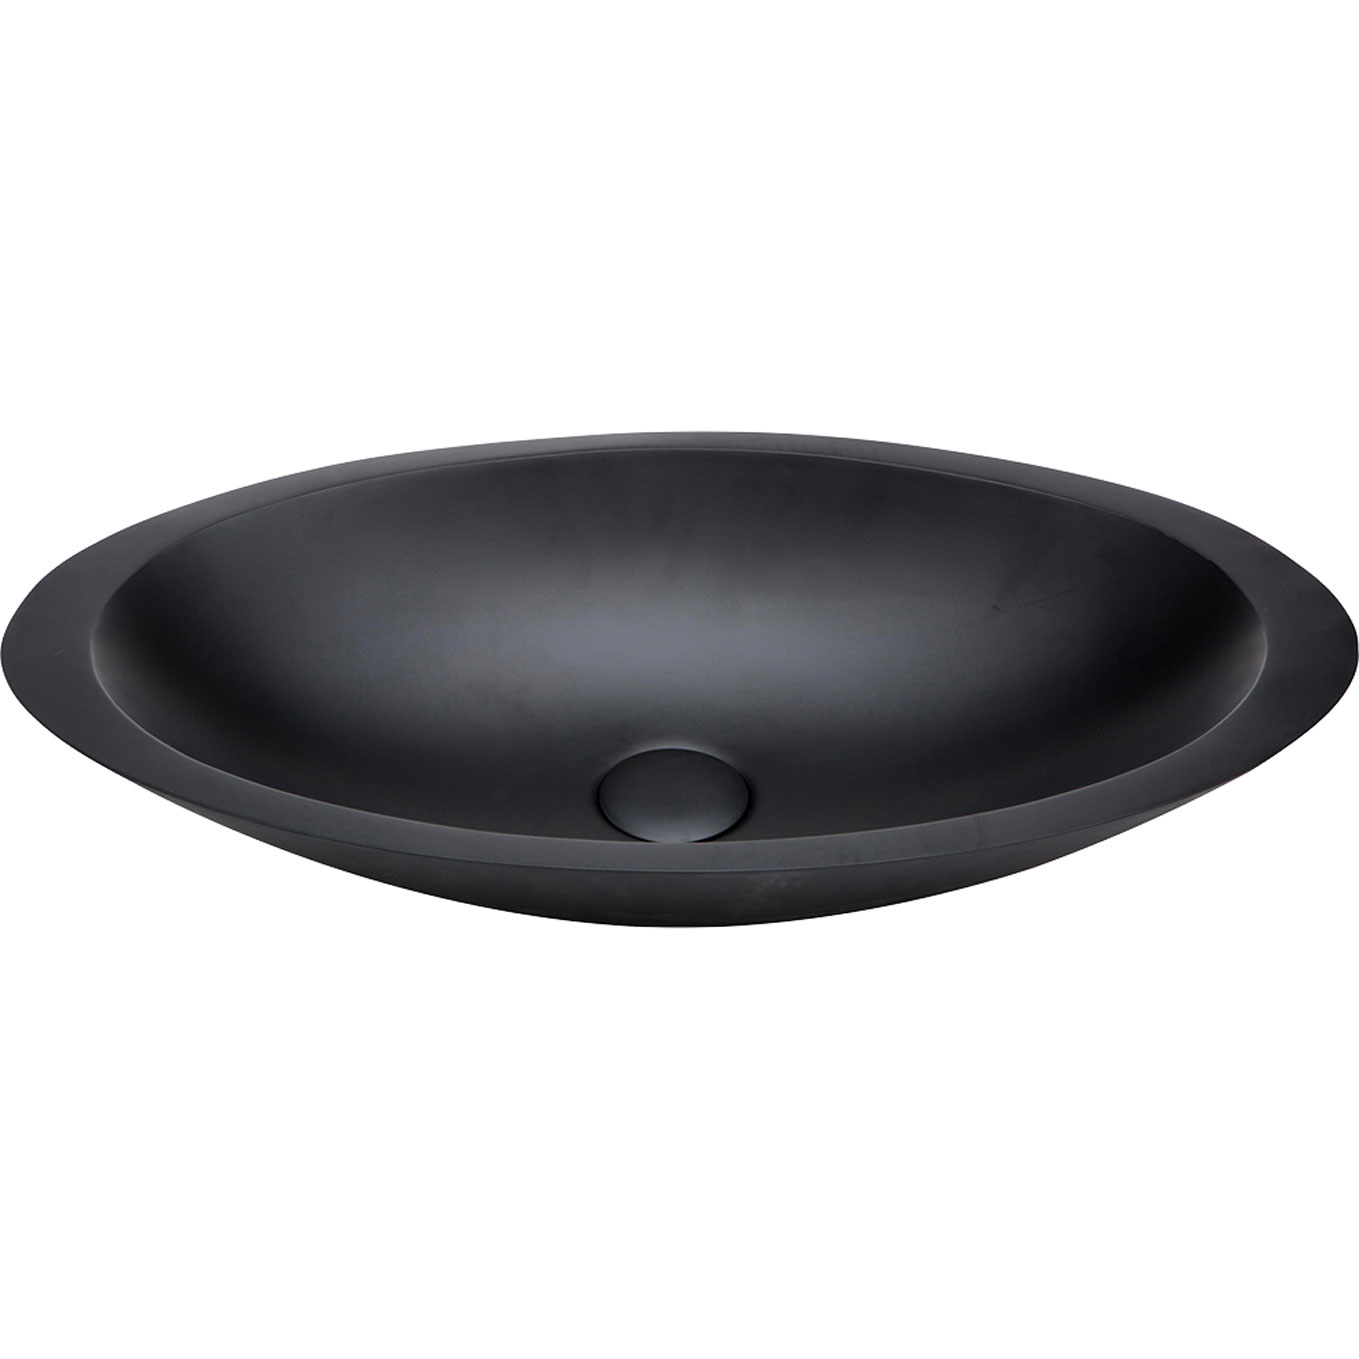 FIENZA CSB01-MB BAHAMA SOLID SURFACE OVAL ABOVE COUNTER BASIN MATTE BLACK